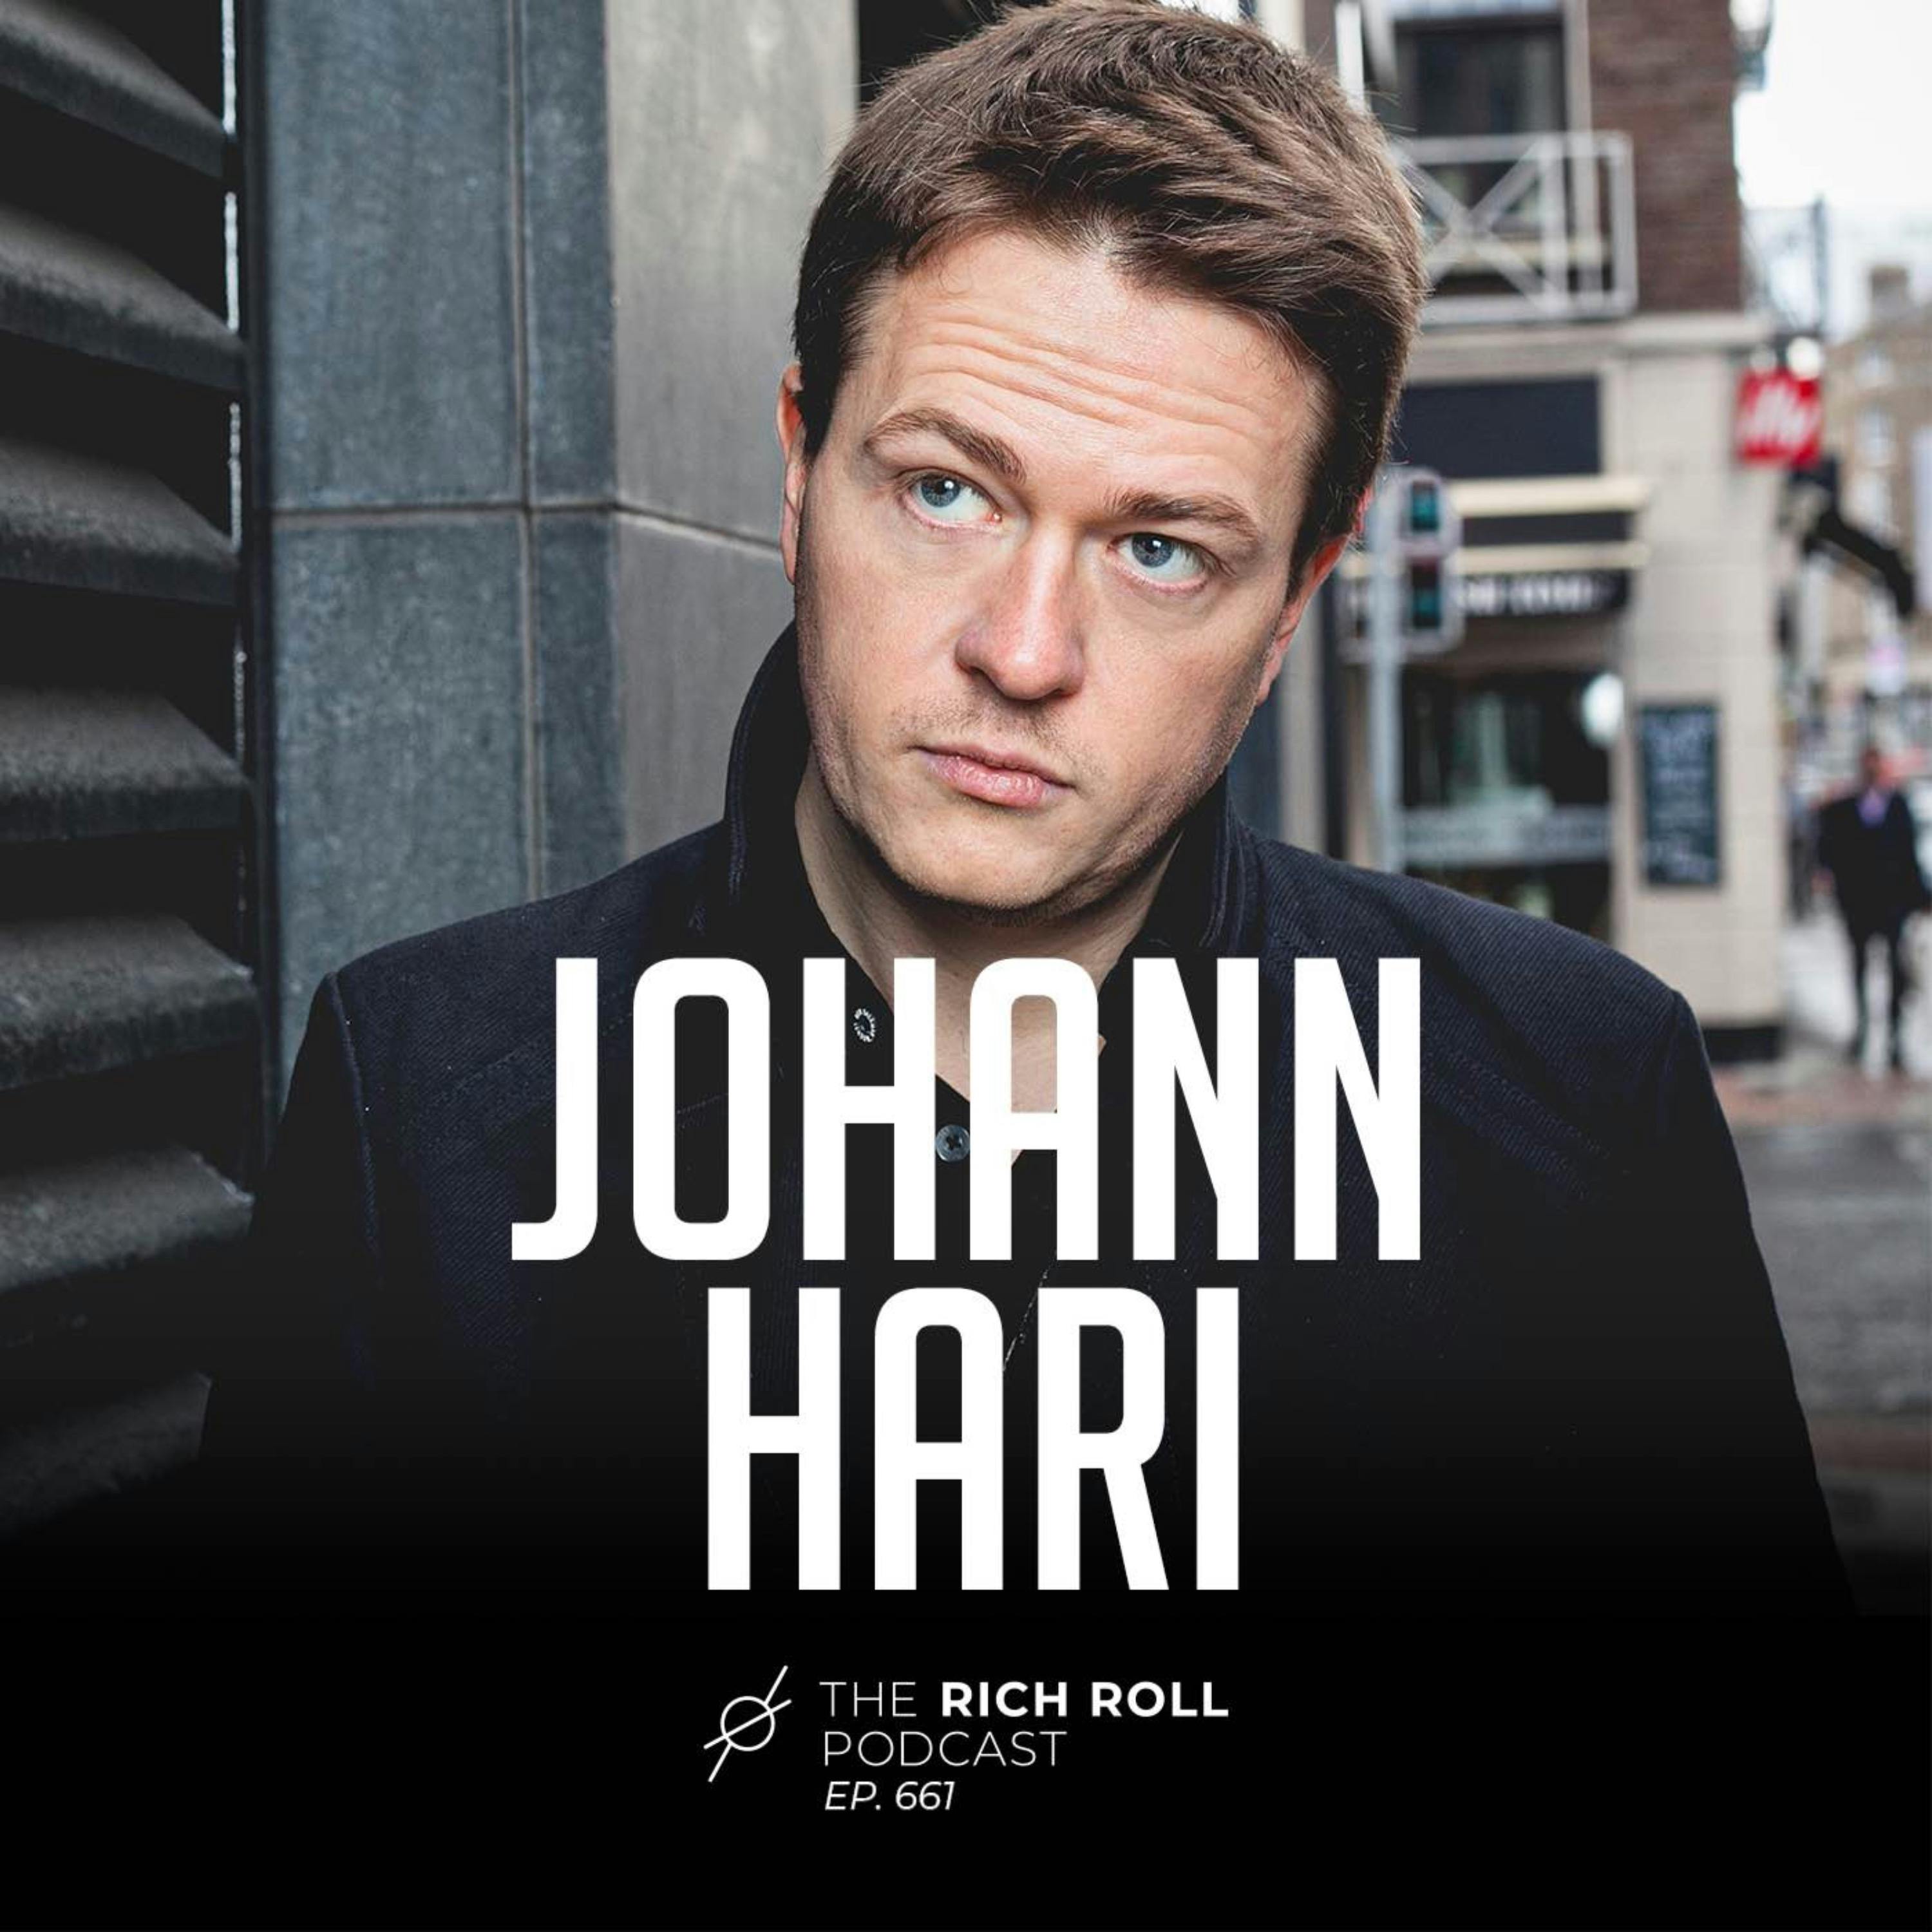 Johann Hari On Why You Can’t Pay Attention (& How To Reclaim Your Focus)